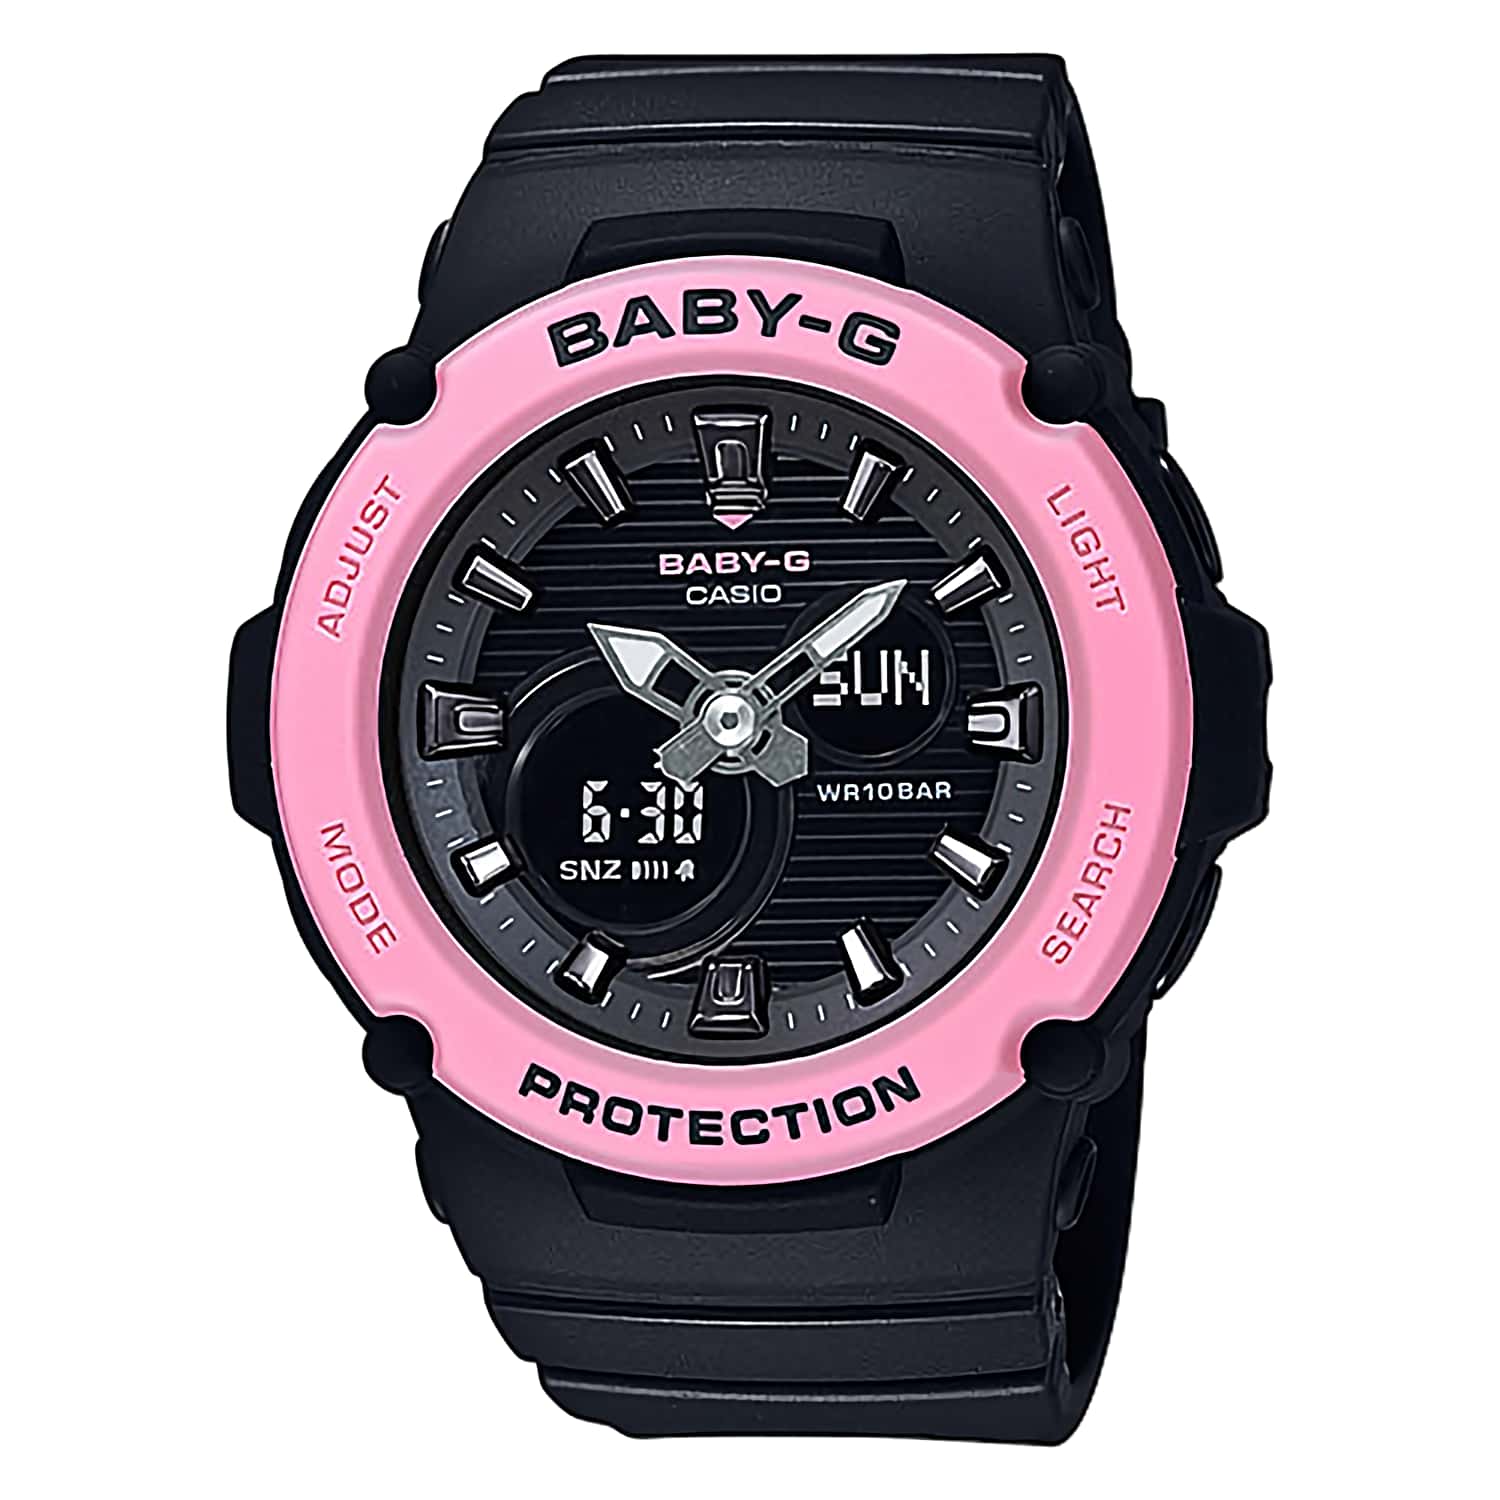 BGA270-1A Casio Baby-G Sports Watch. Introducing new models from BABY-G, the casual watch for active women. Two-piece bezels make it possible to create colourful combinations, and a basic “PROTECTION” design adds to the overall sporty look of these watche